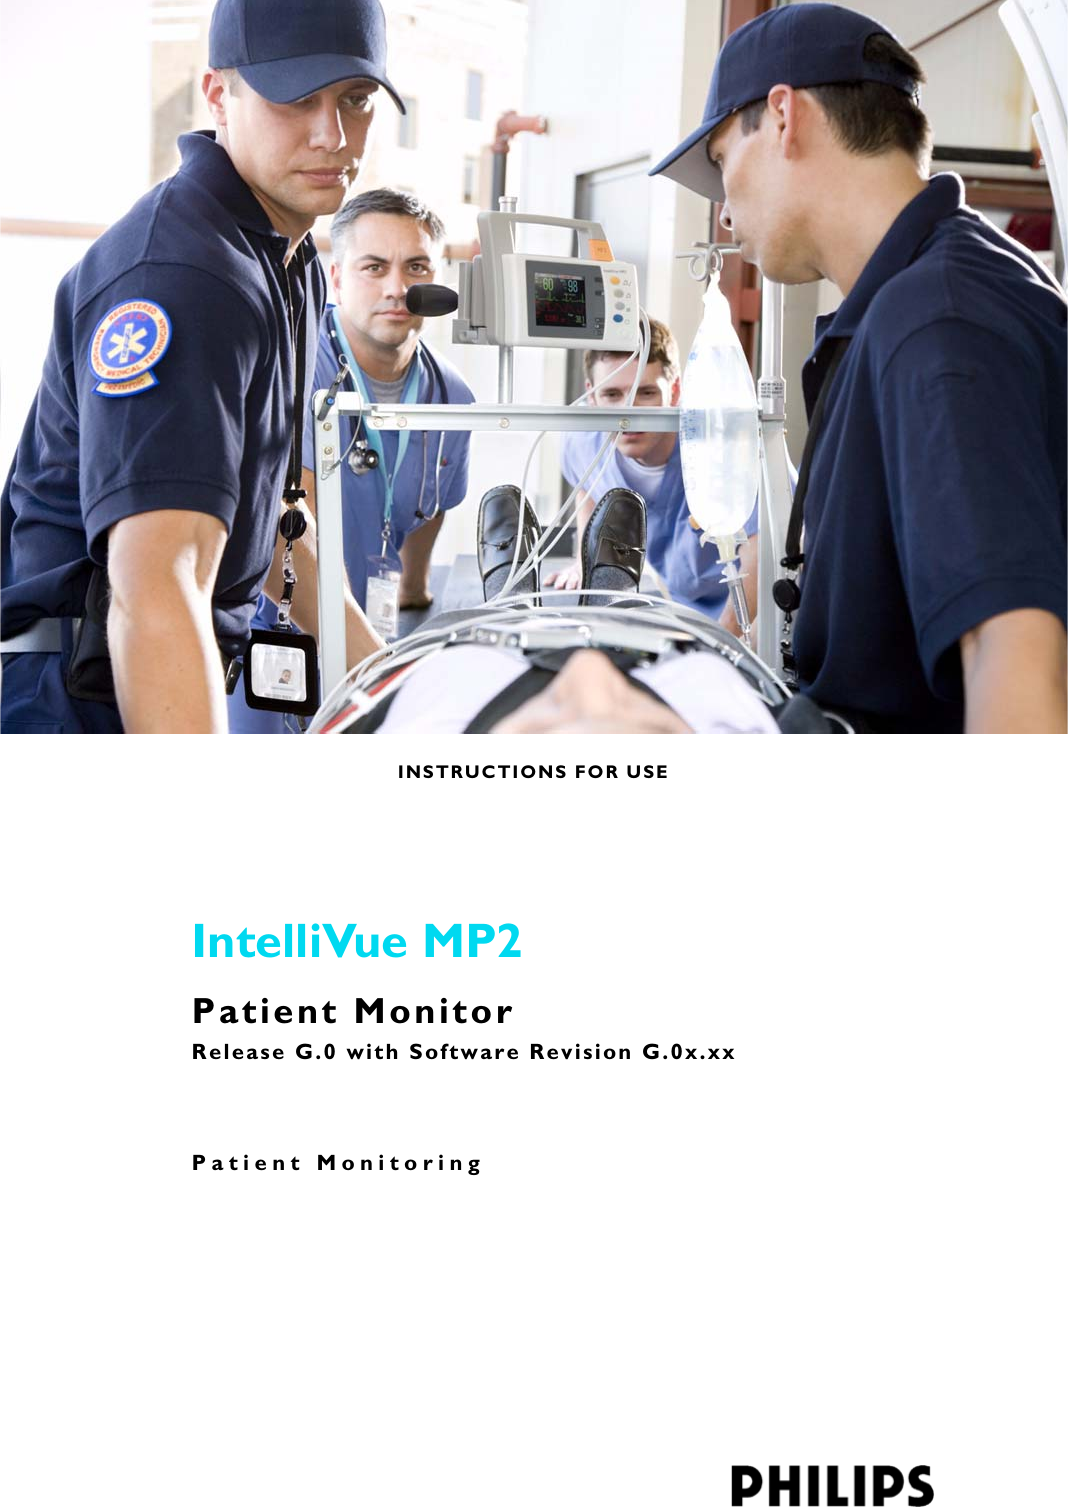 Patient MonitoringINSTRUCTIONS FOR USEIntelliVue MP2Patient MonitorRelease G.0 with Software Revision G.0x.xx